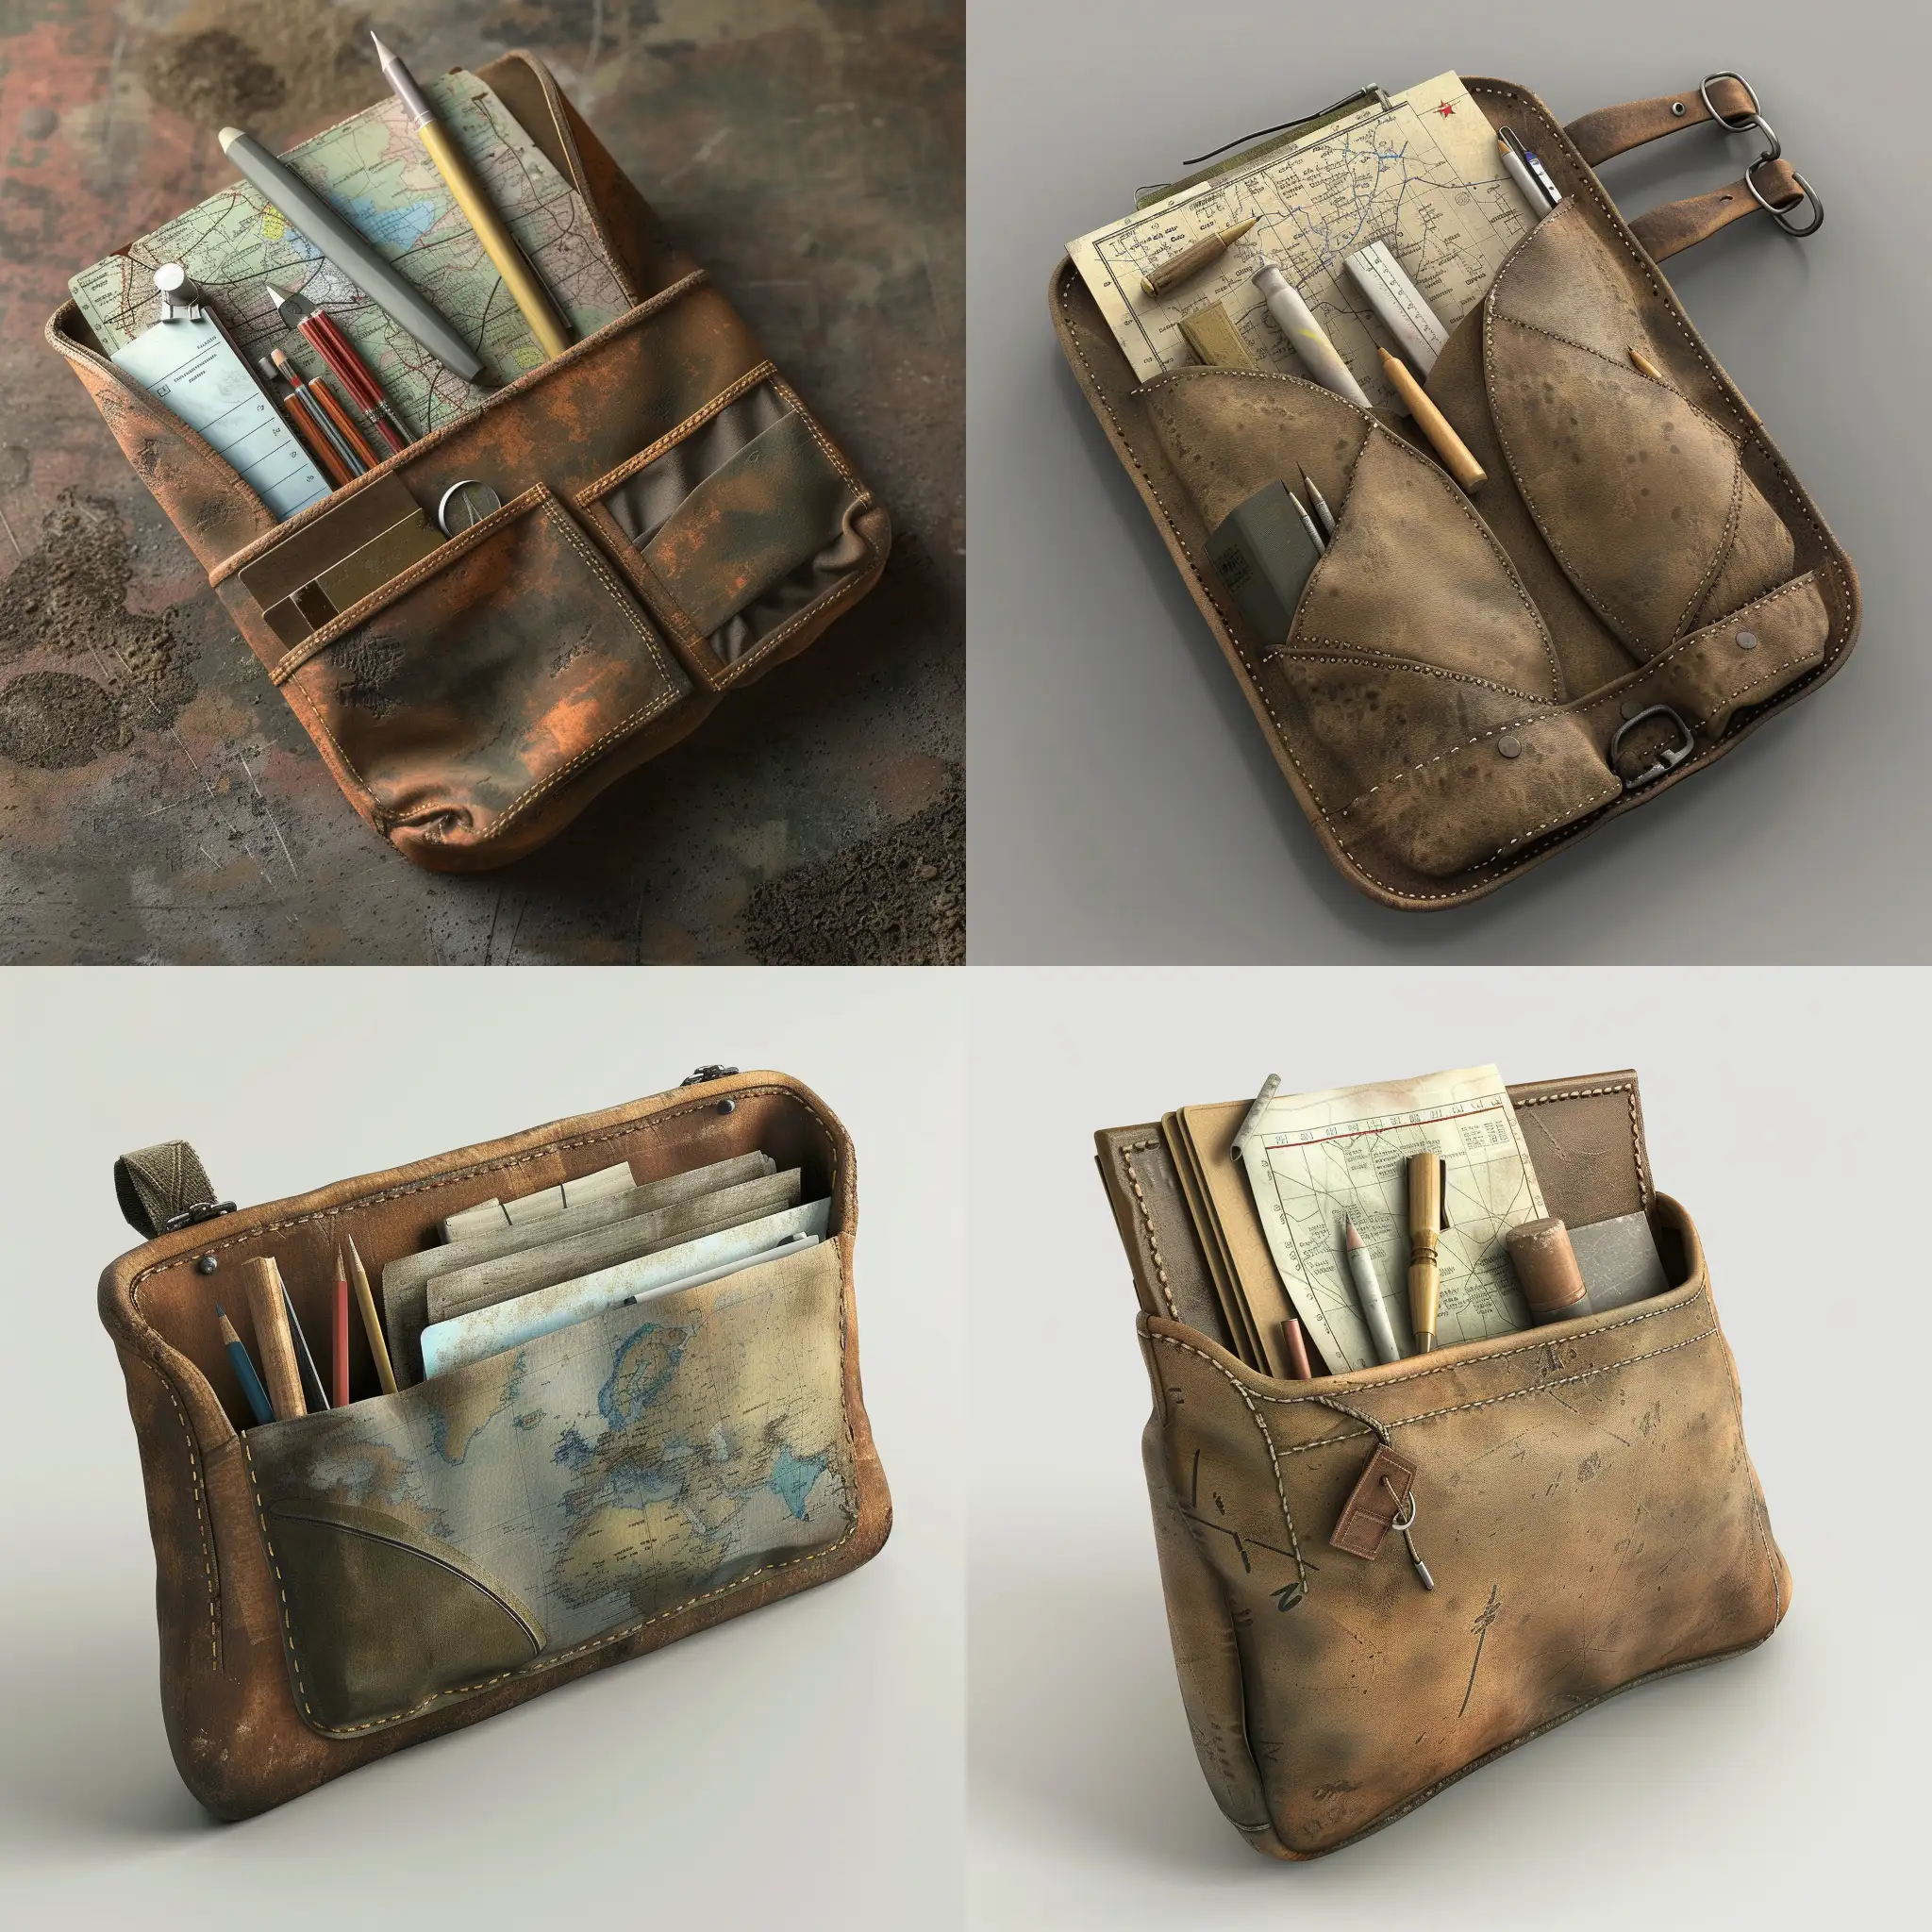 isometric set, realistic worn military cartographic kit sticking out of old soviet oblong leather tactical pouch with little stationery, 3d render, grim